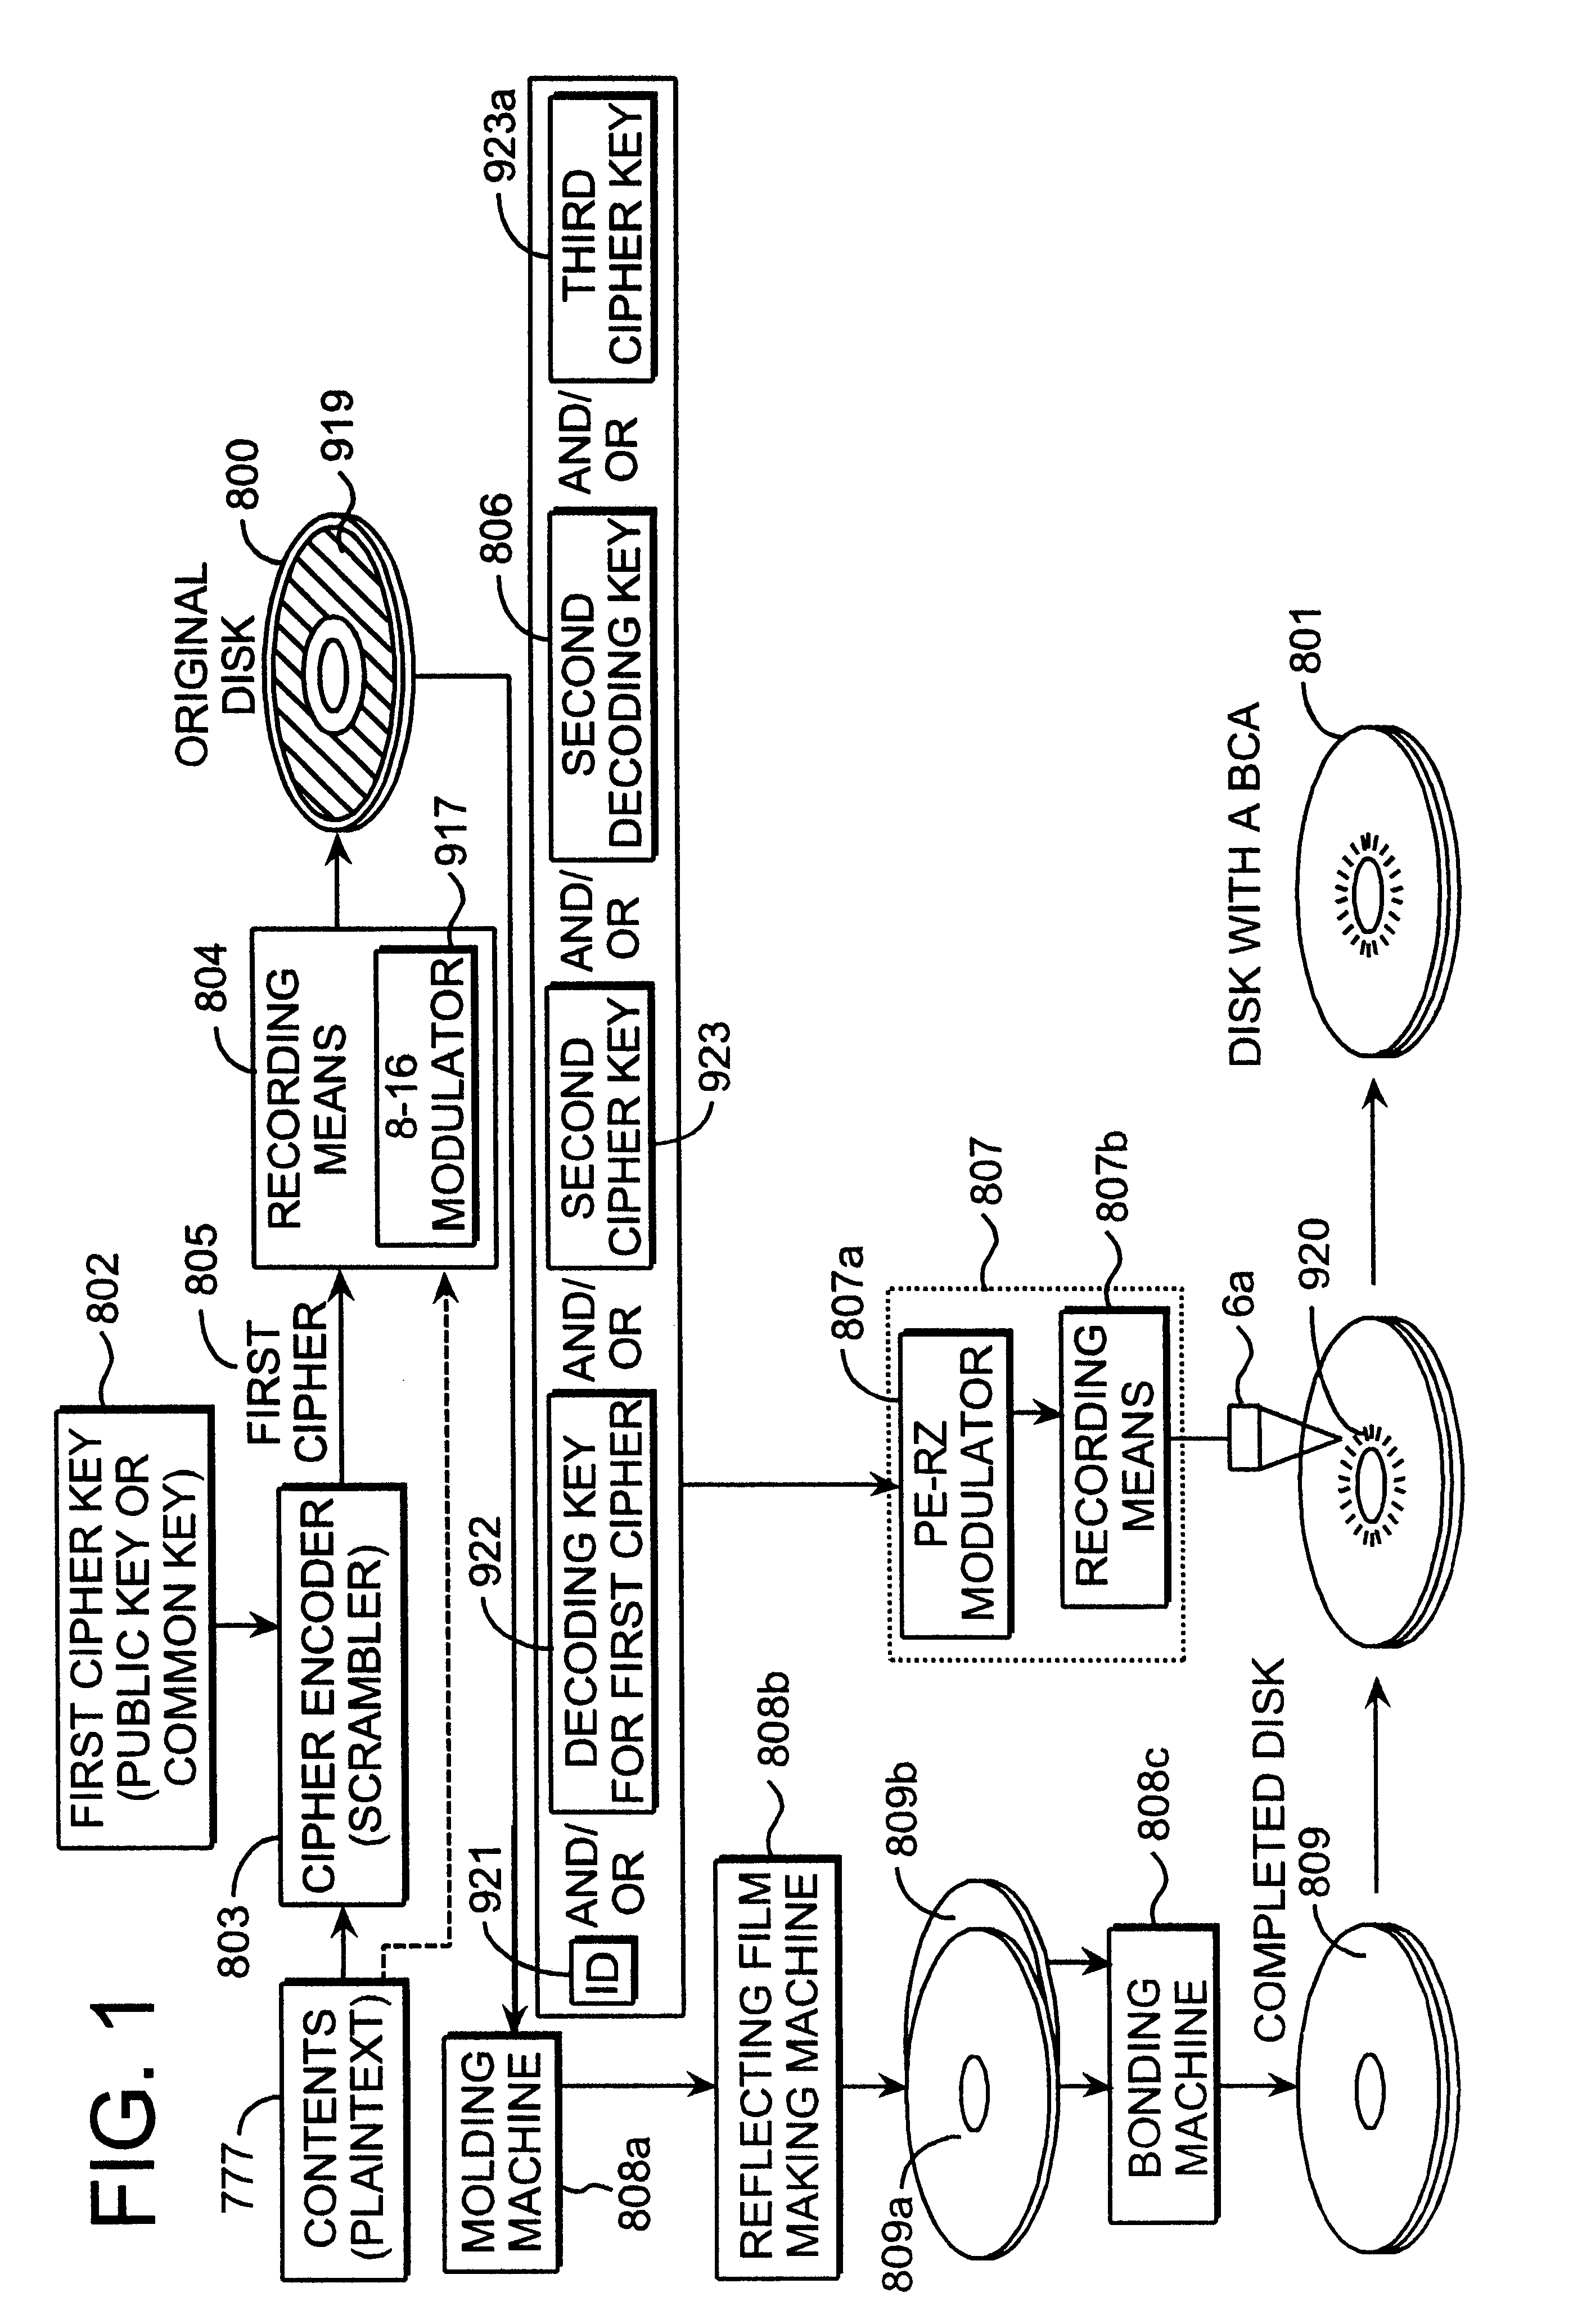 Recordable optical disk including an auxiliary information presence indicator